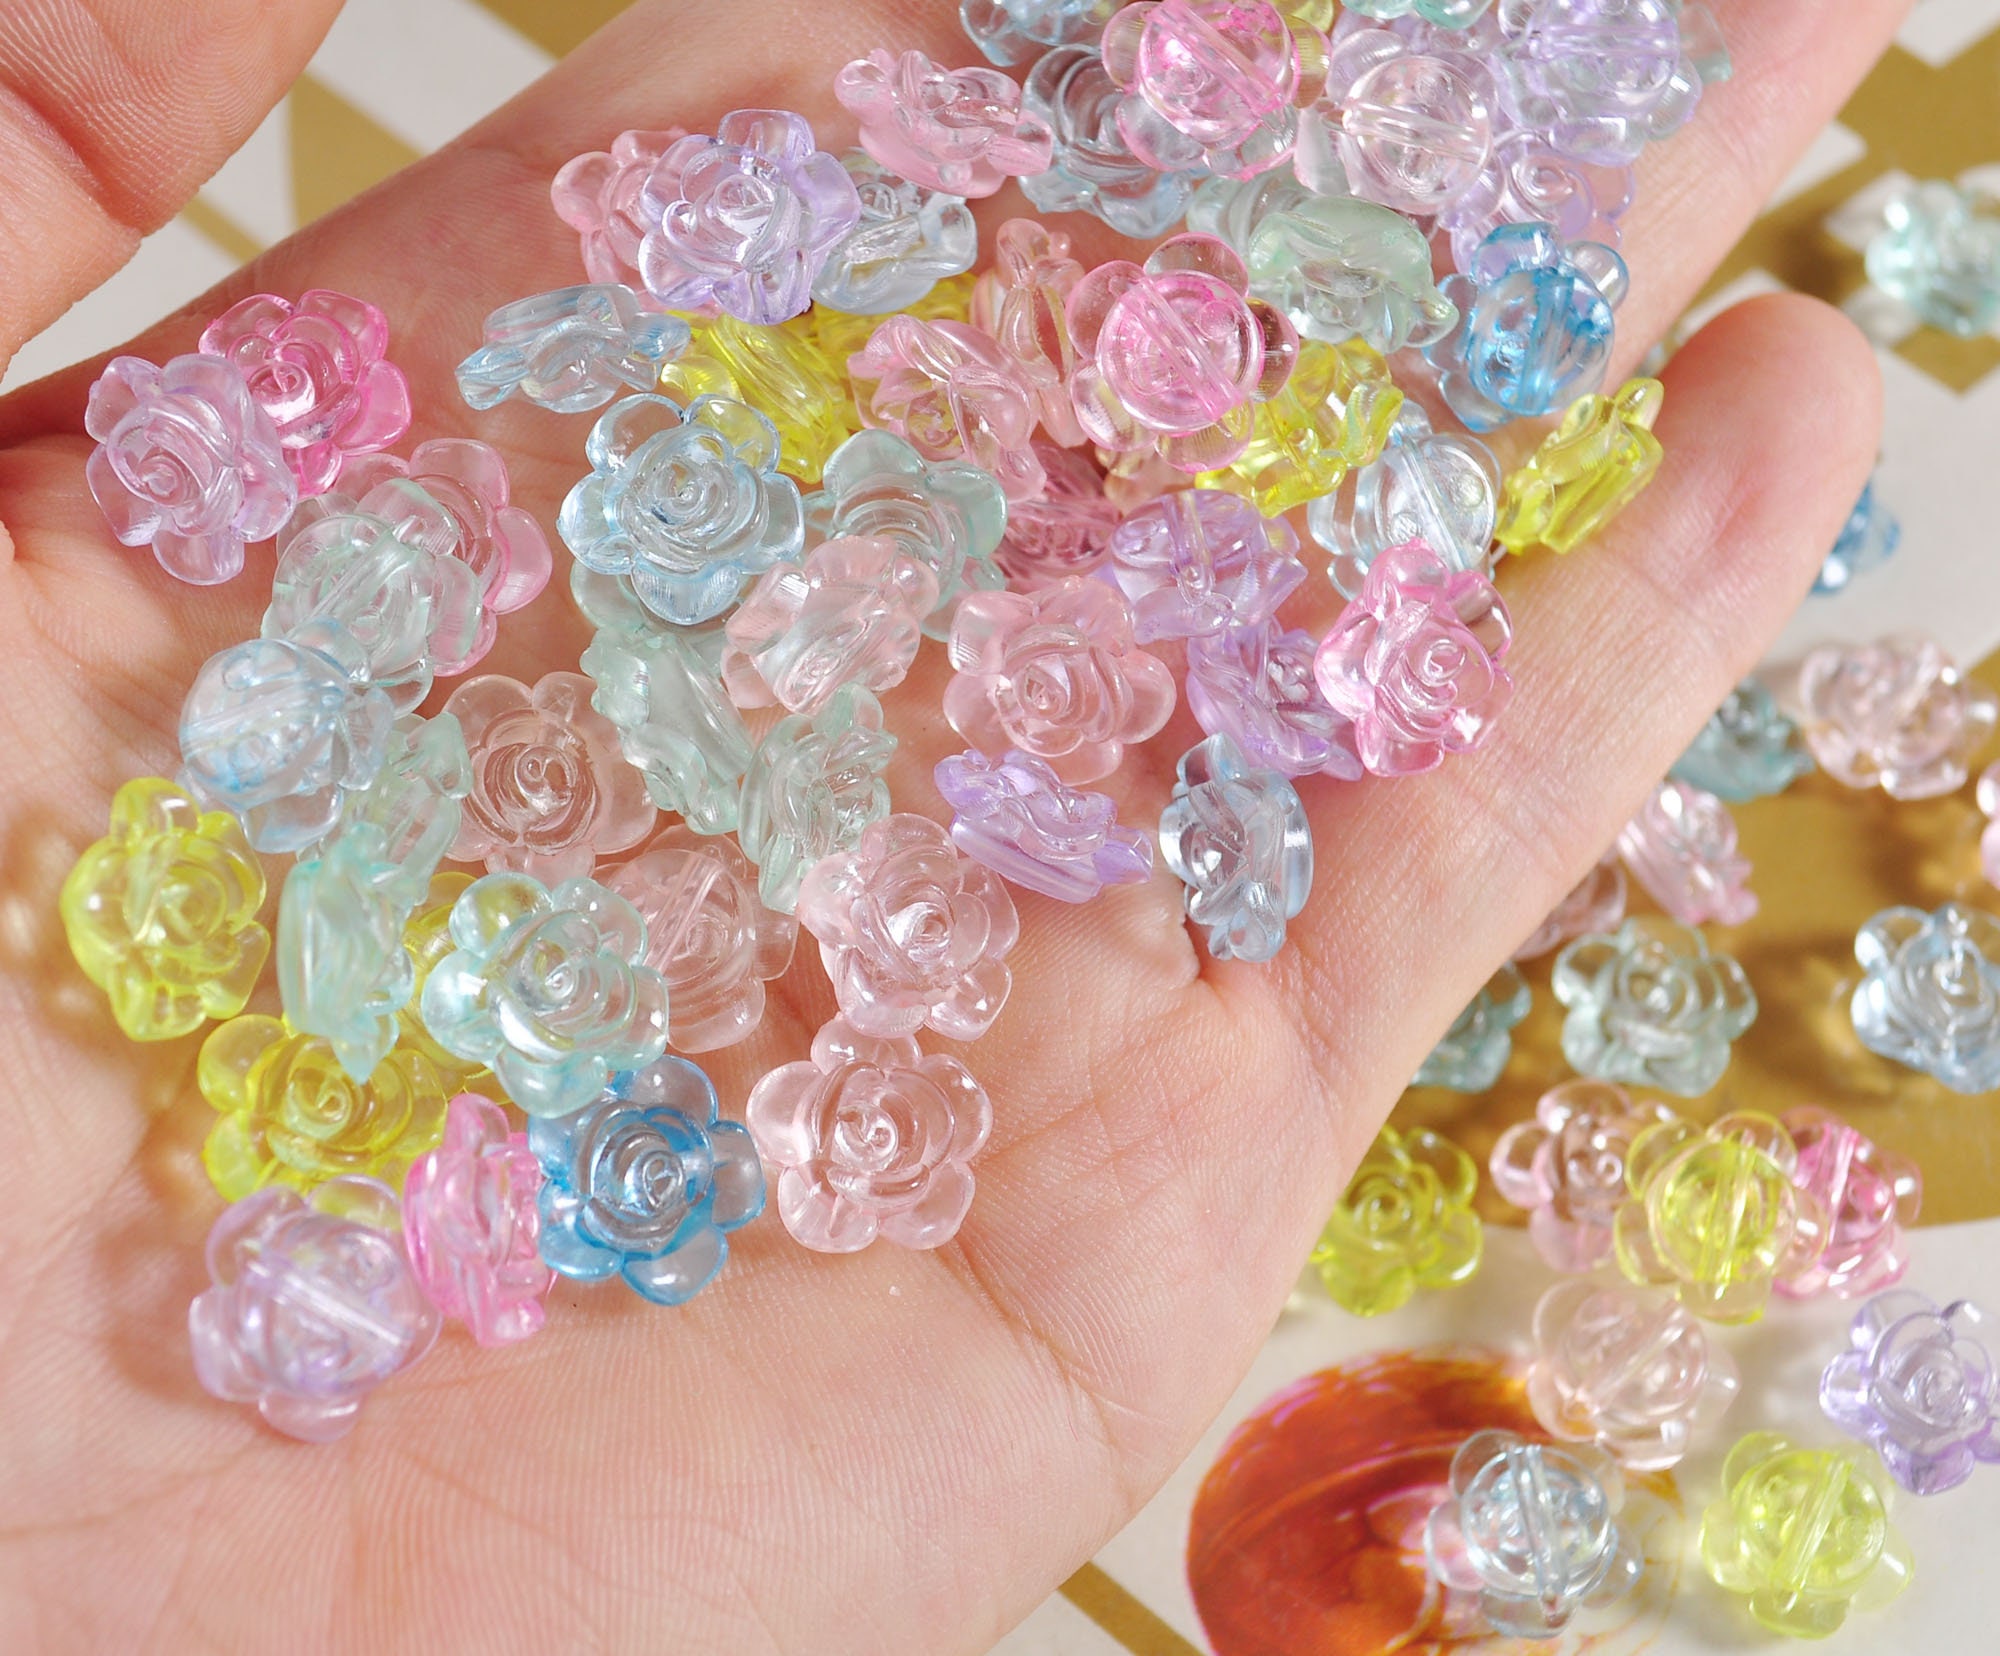 Flower Beads,24mm Flower Beads, Acrylic Beads,Mixed Color beads,Pastel  Flower Beads,100 pcs set